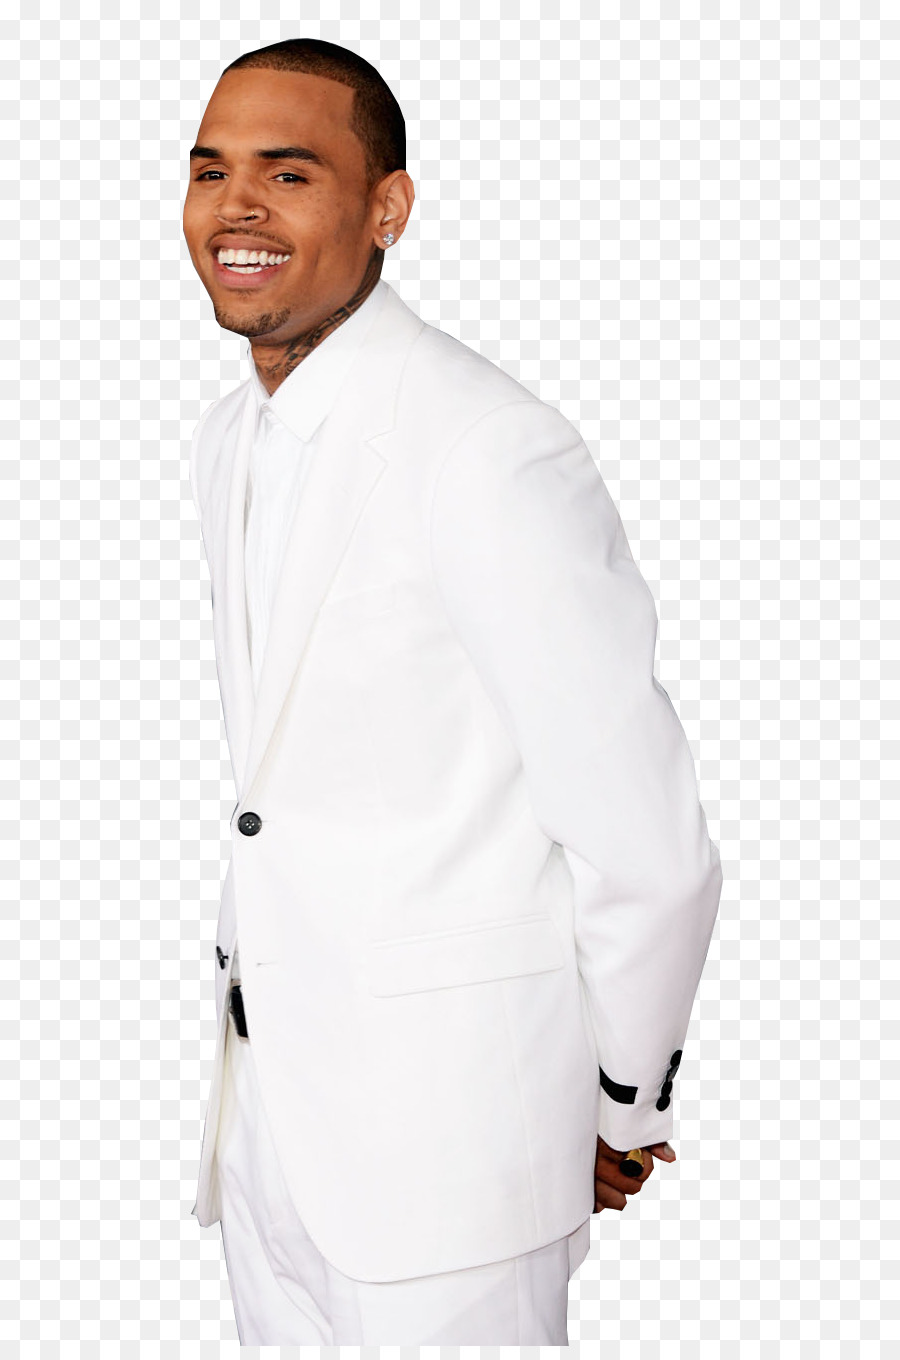 Chris Brown Photography Clip art - christopher